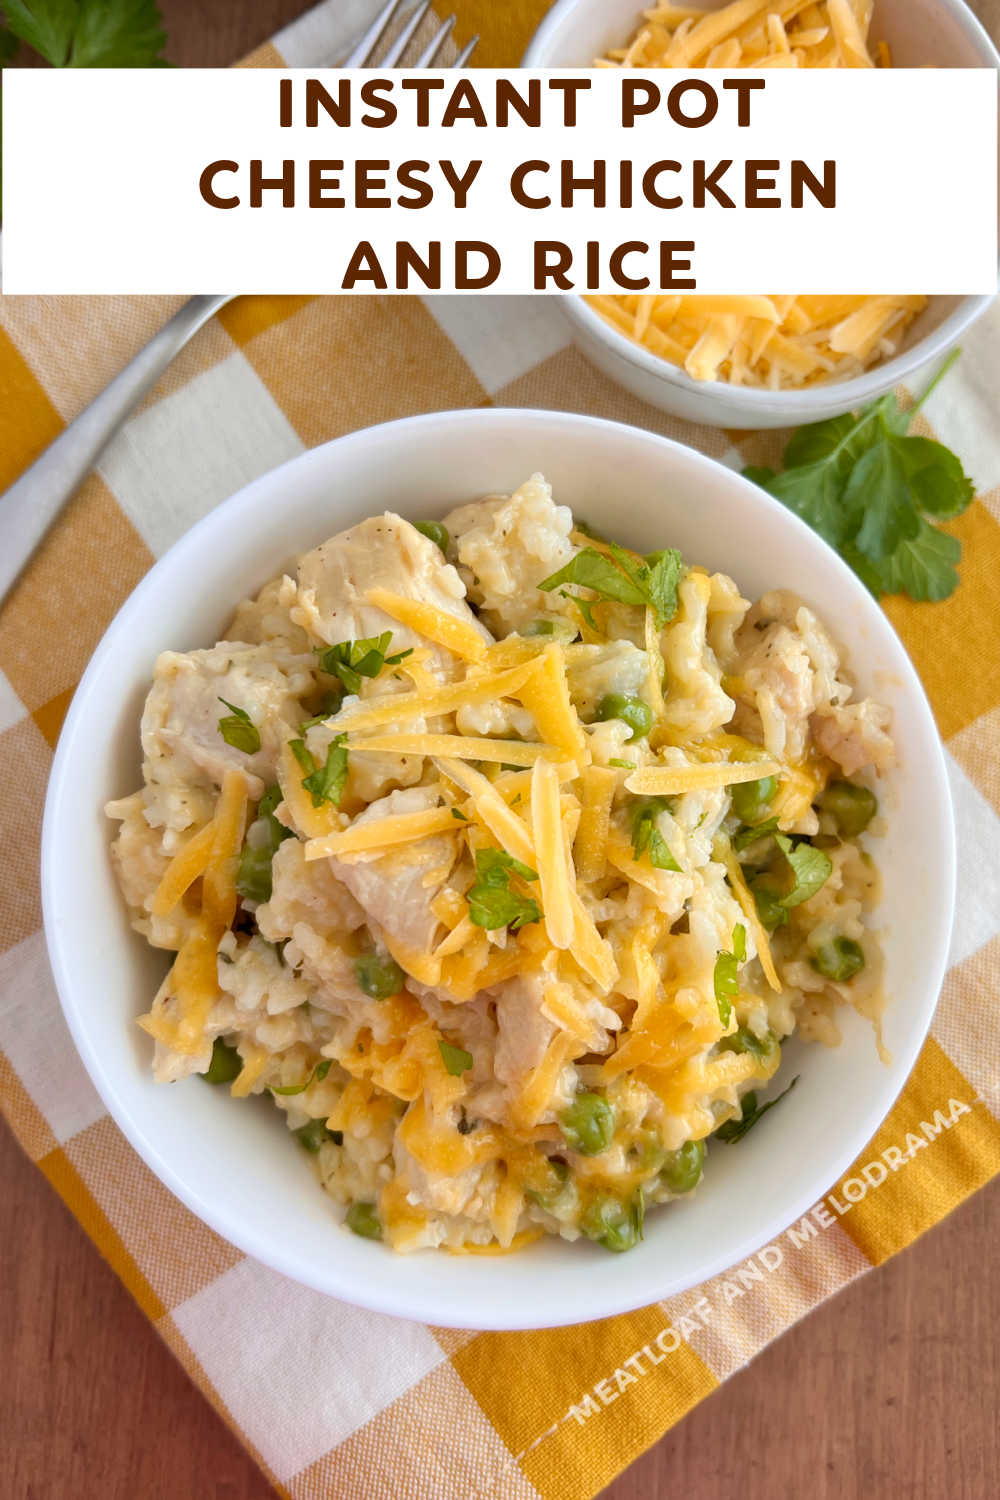 Instant Pot Cheesy Chicken and Rice is a complete meal with creamy chicken, rice, peas and cheese. A one-pot meal the whole family loves! This easy chicken dinner is perfect for busy weeknights!  via @meamel